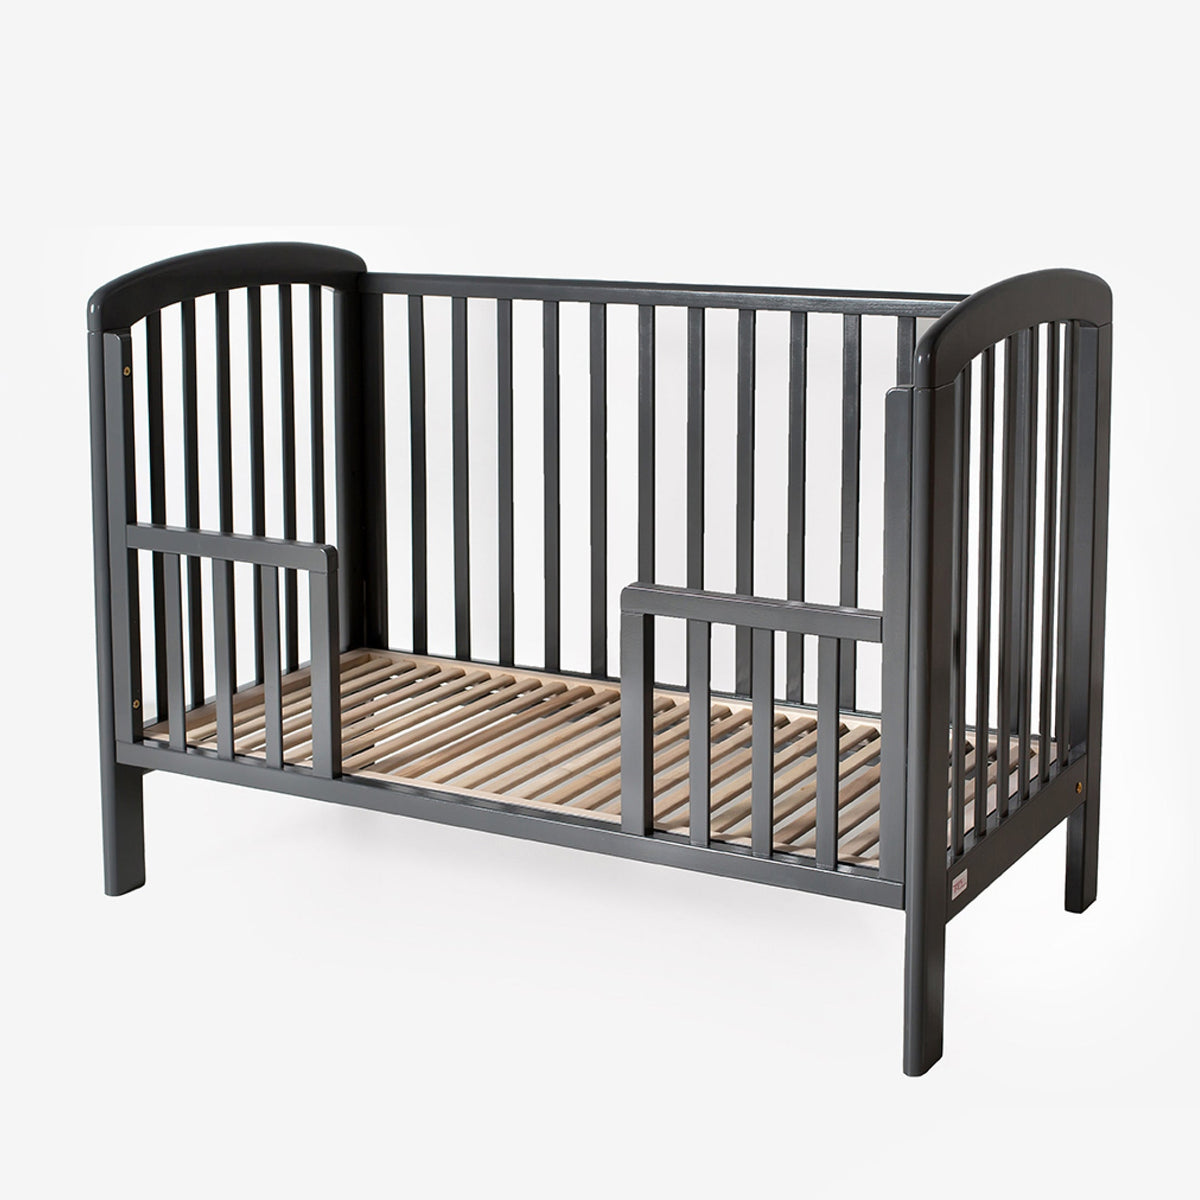 Junior Rail all-round, fits Lux, Royal, Lina, Loft and Romantica GREY